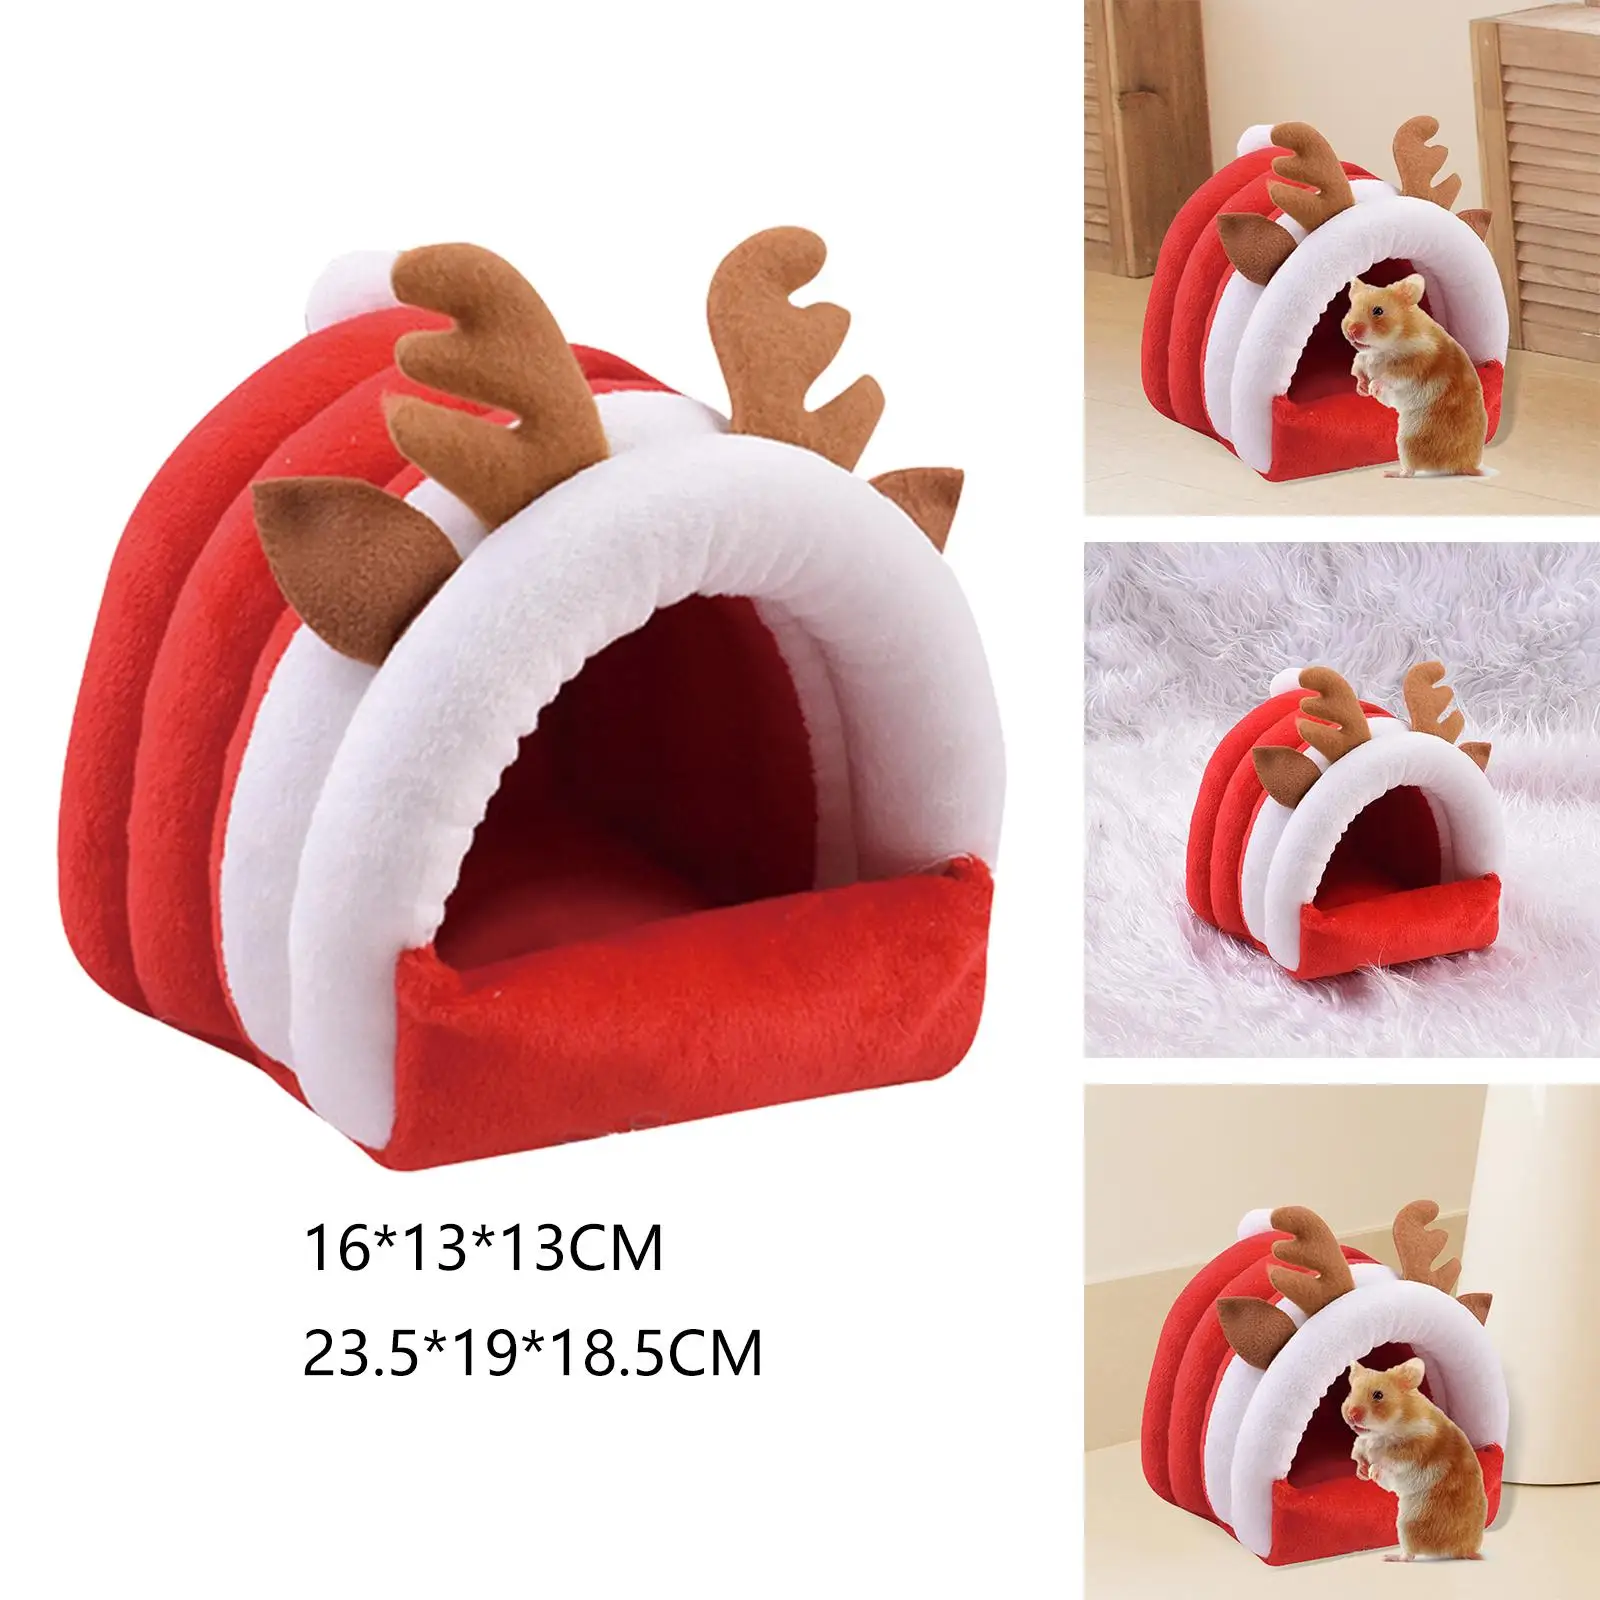 Small Pet Guinea Bed Hamster House Warm Accessories Basket Sleeping Bag Bedding for Mice Rabbit Ferrets Hedgehog Bunny